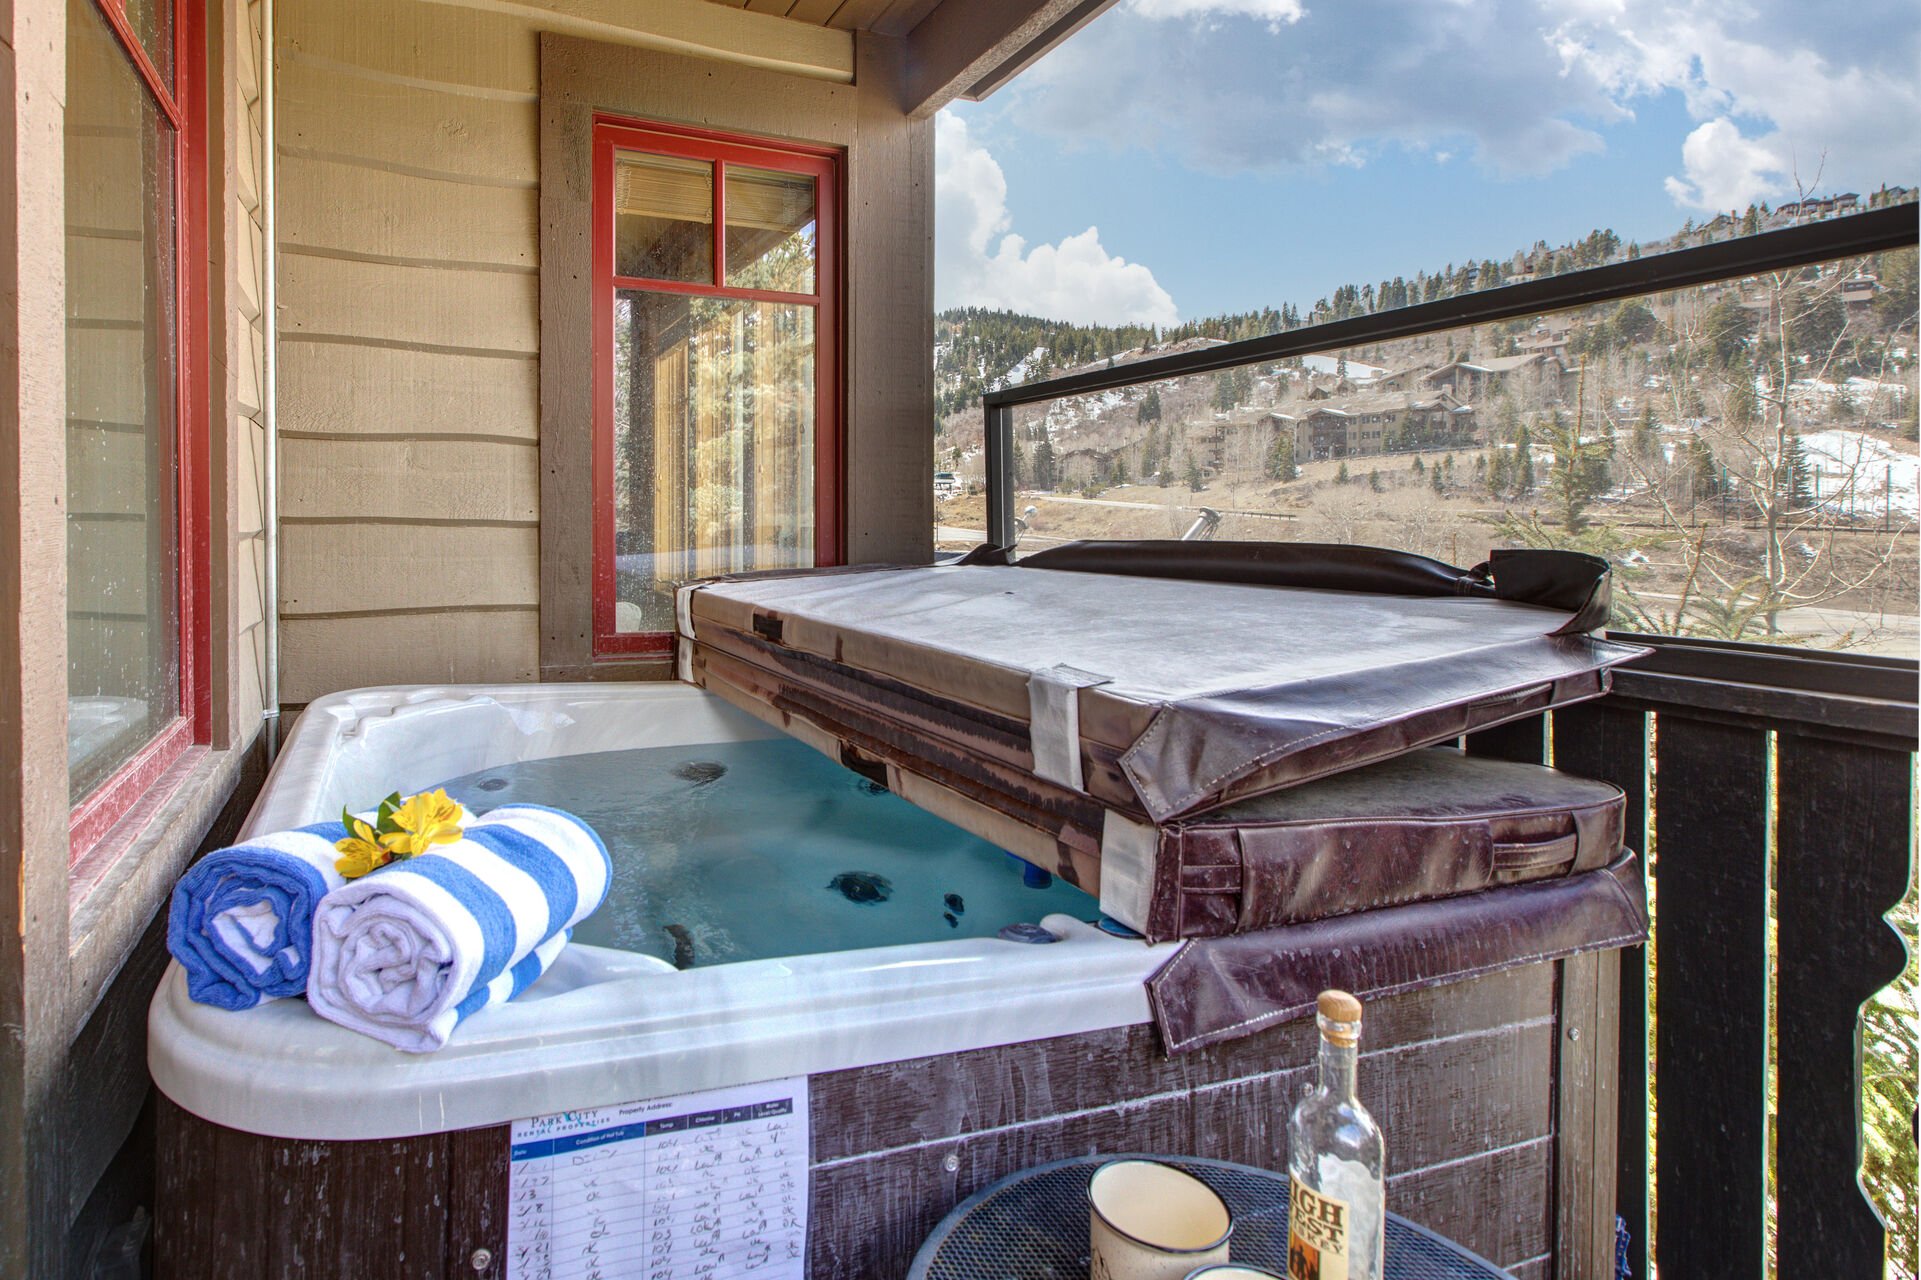 Enjoy the Views from the Private Hot Tub